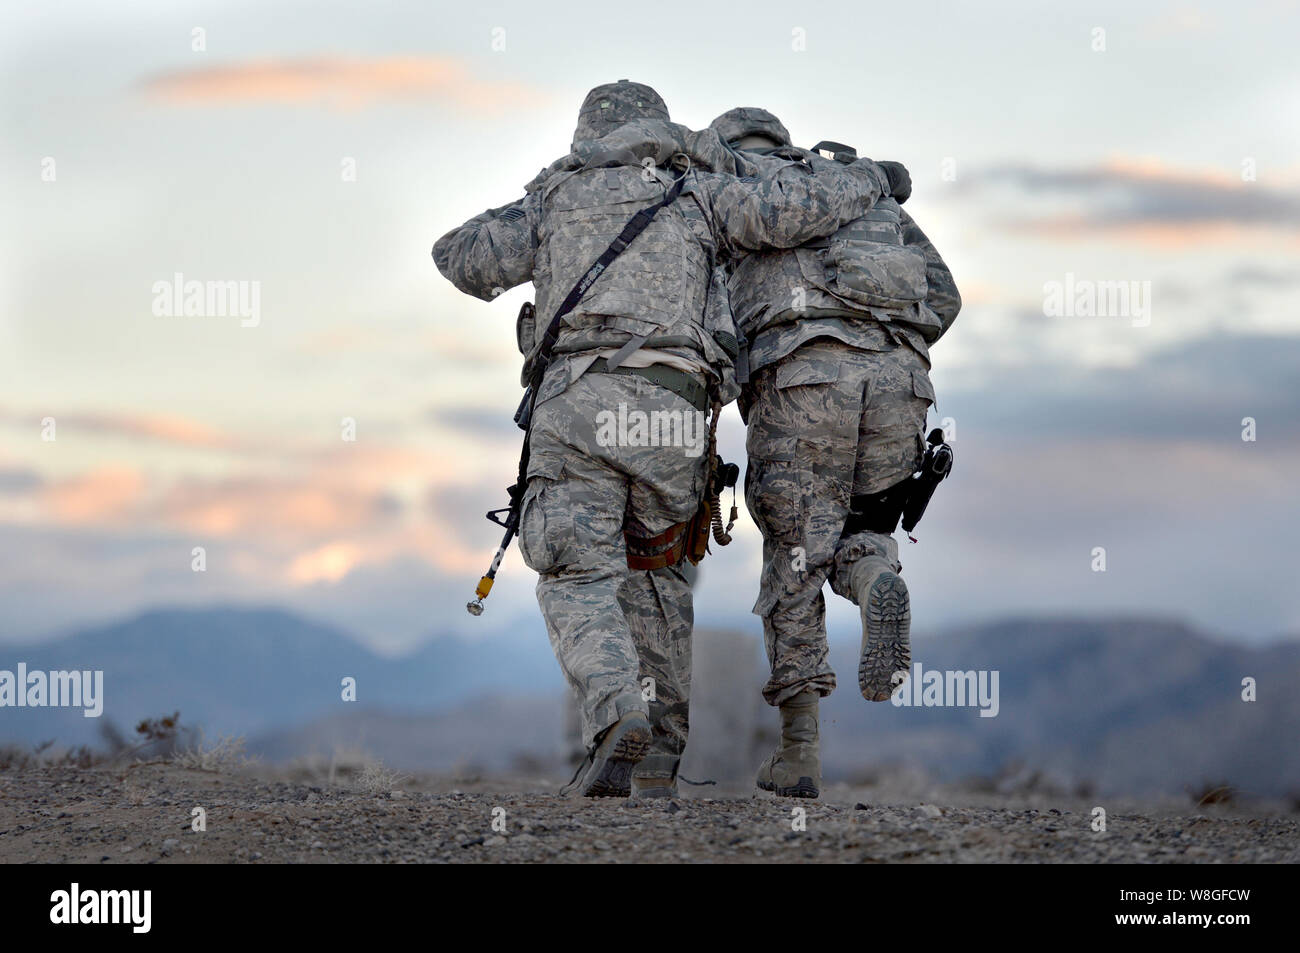 A U.S. soldier helping a fellow soldier during a training exercise Stock Photo